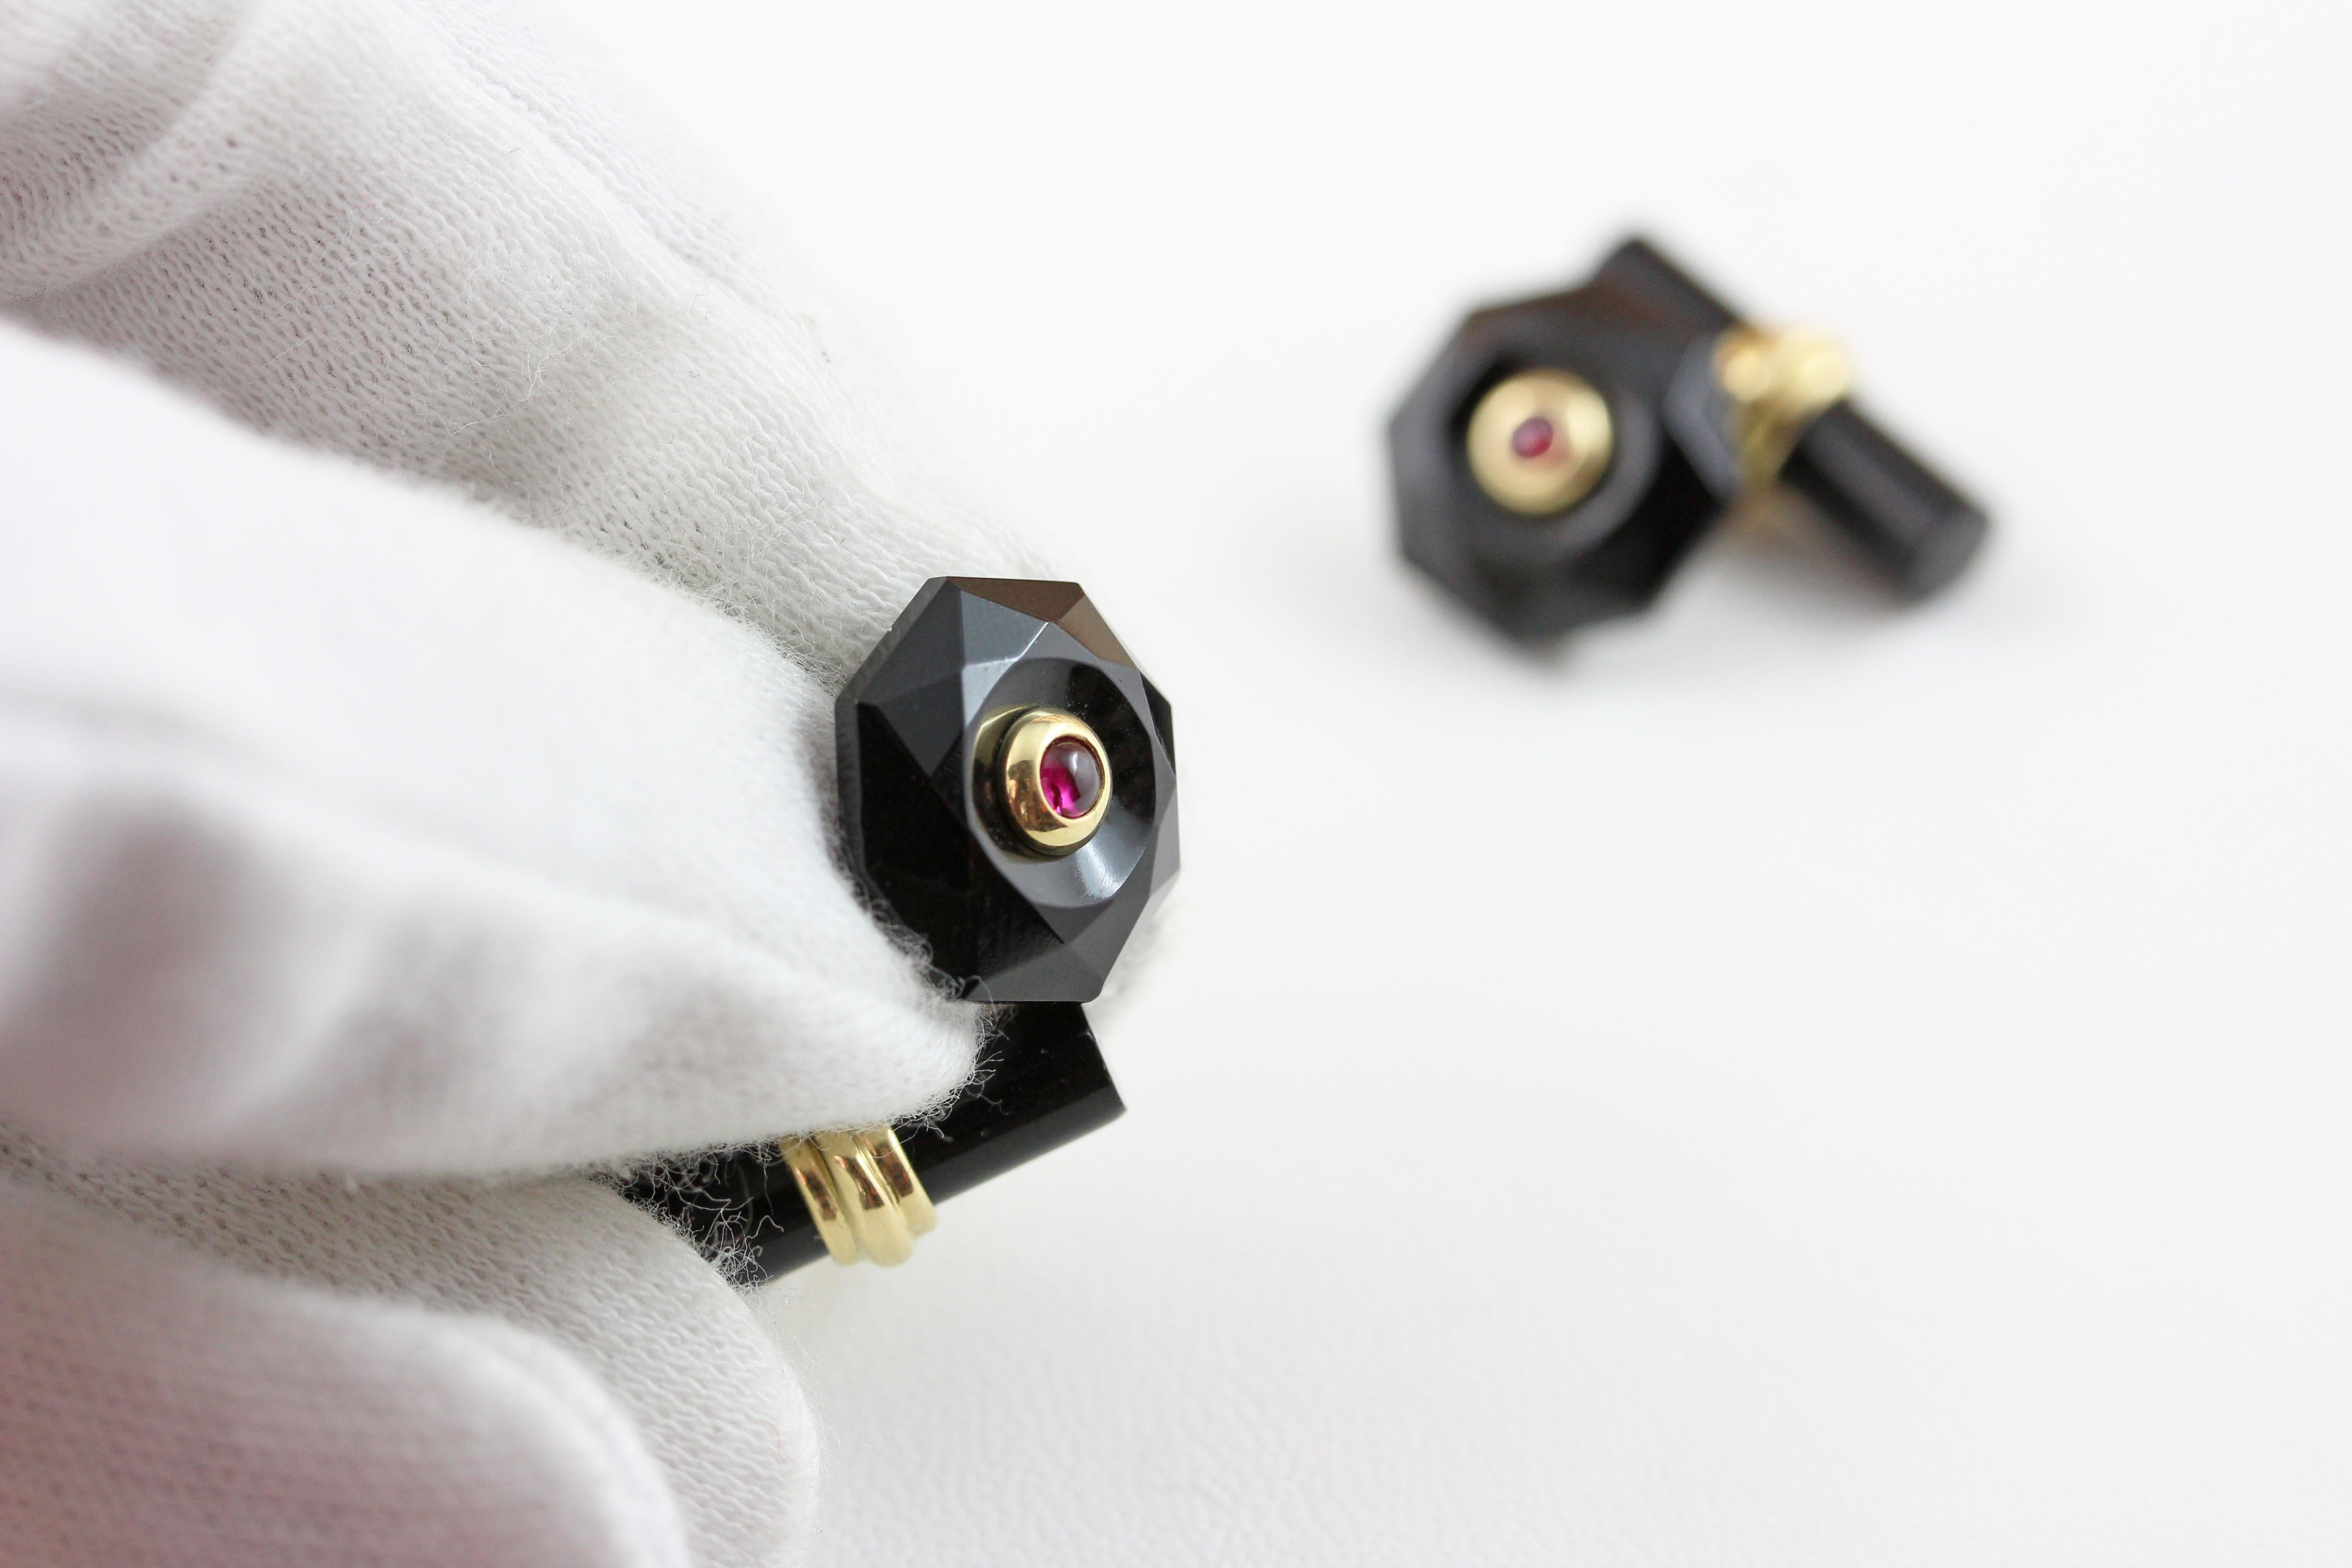 The front face of these exquisite cufflinks has a striking octagonal shape that is convex, multifaceted, and adorned in the center with a cabochon ruby. 
Both the front face and the cylindrical toggle are in onyx, with a post made of 18 karat yellow